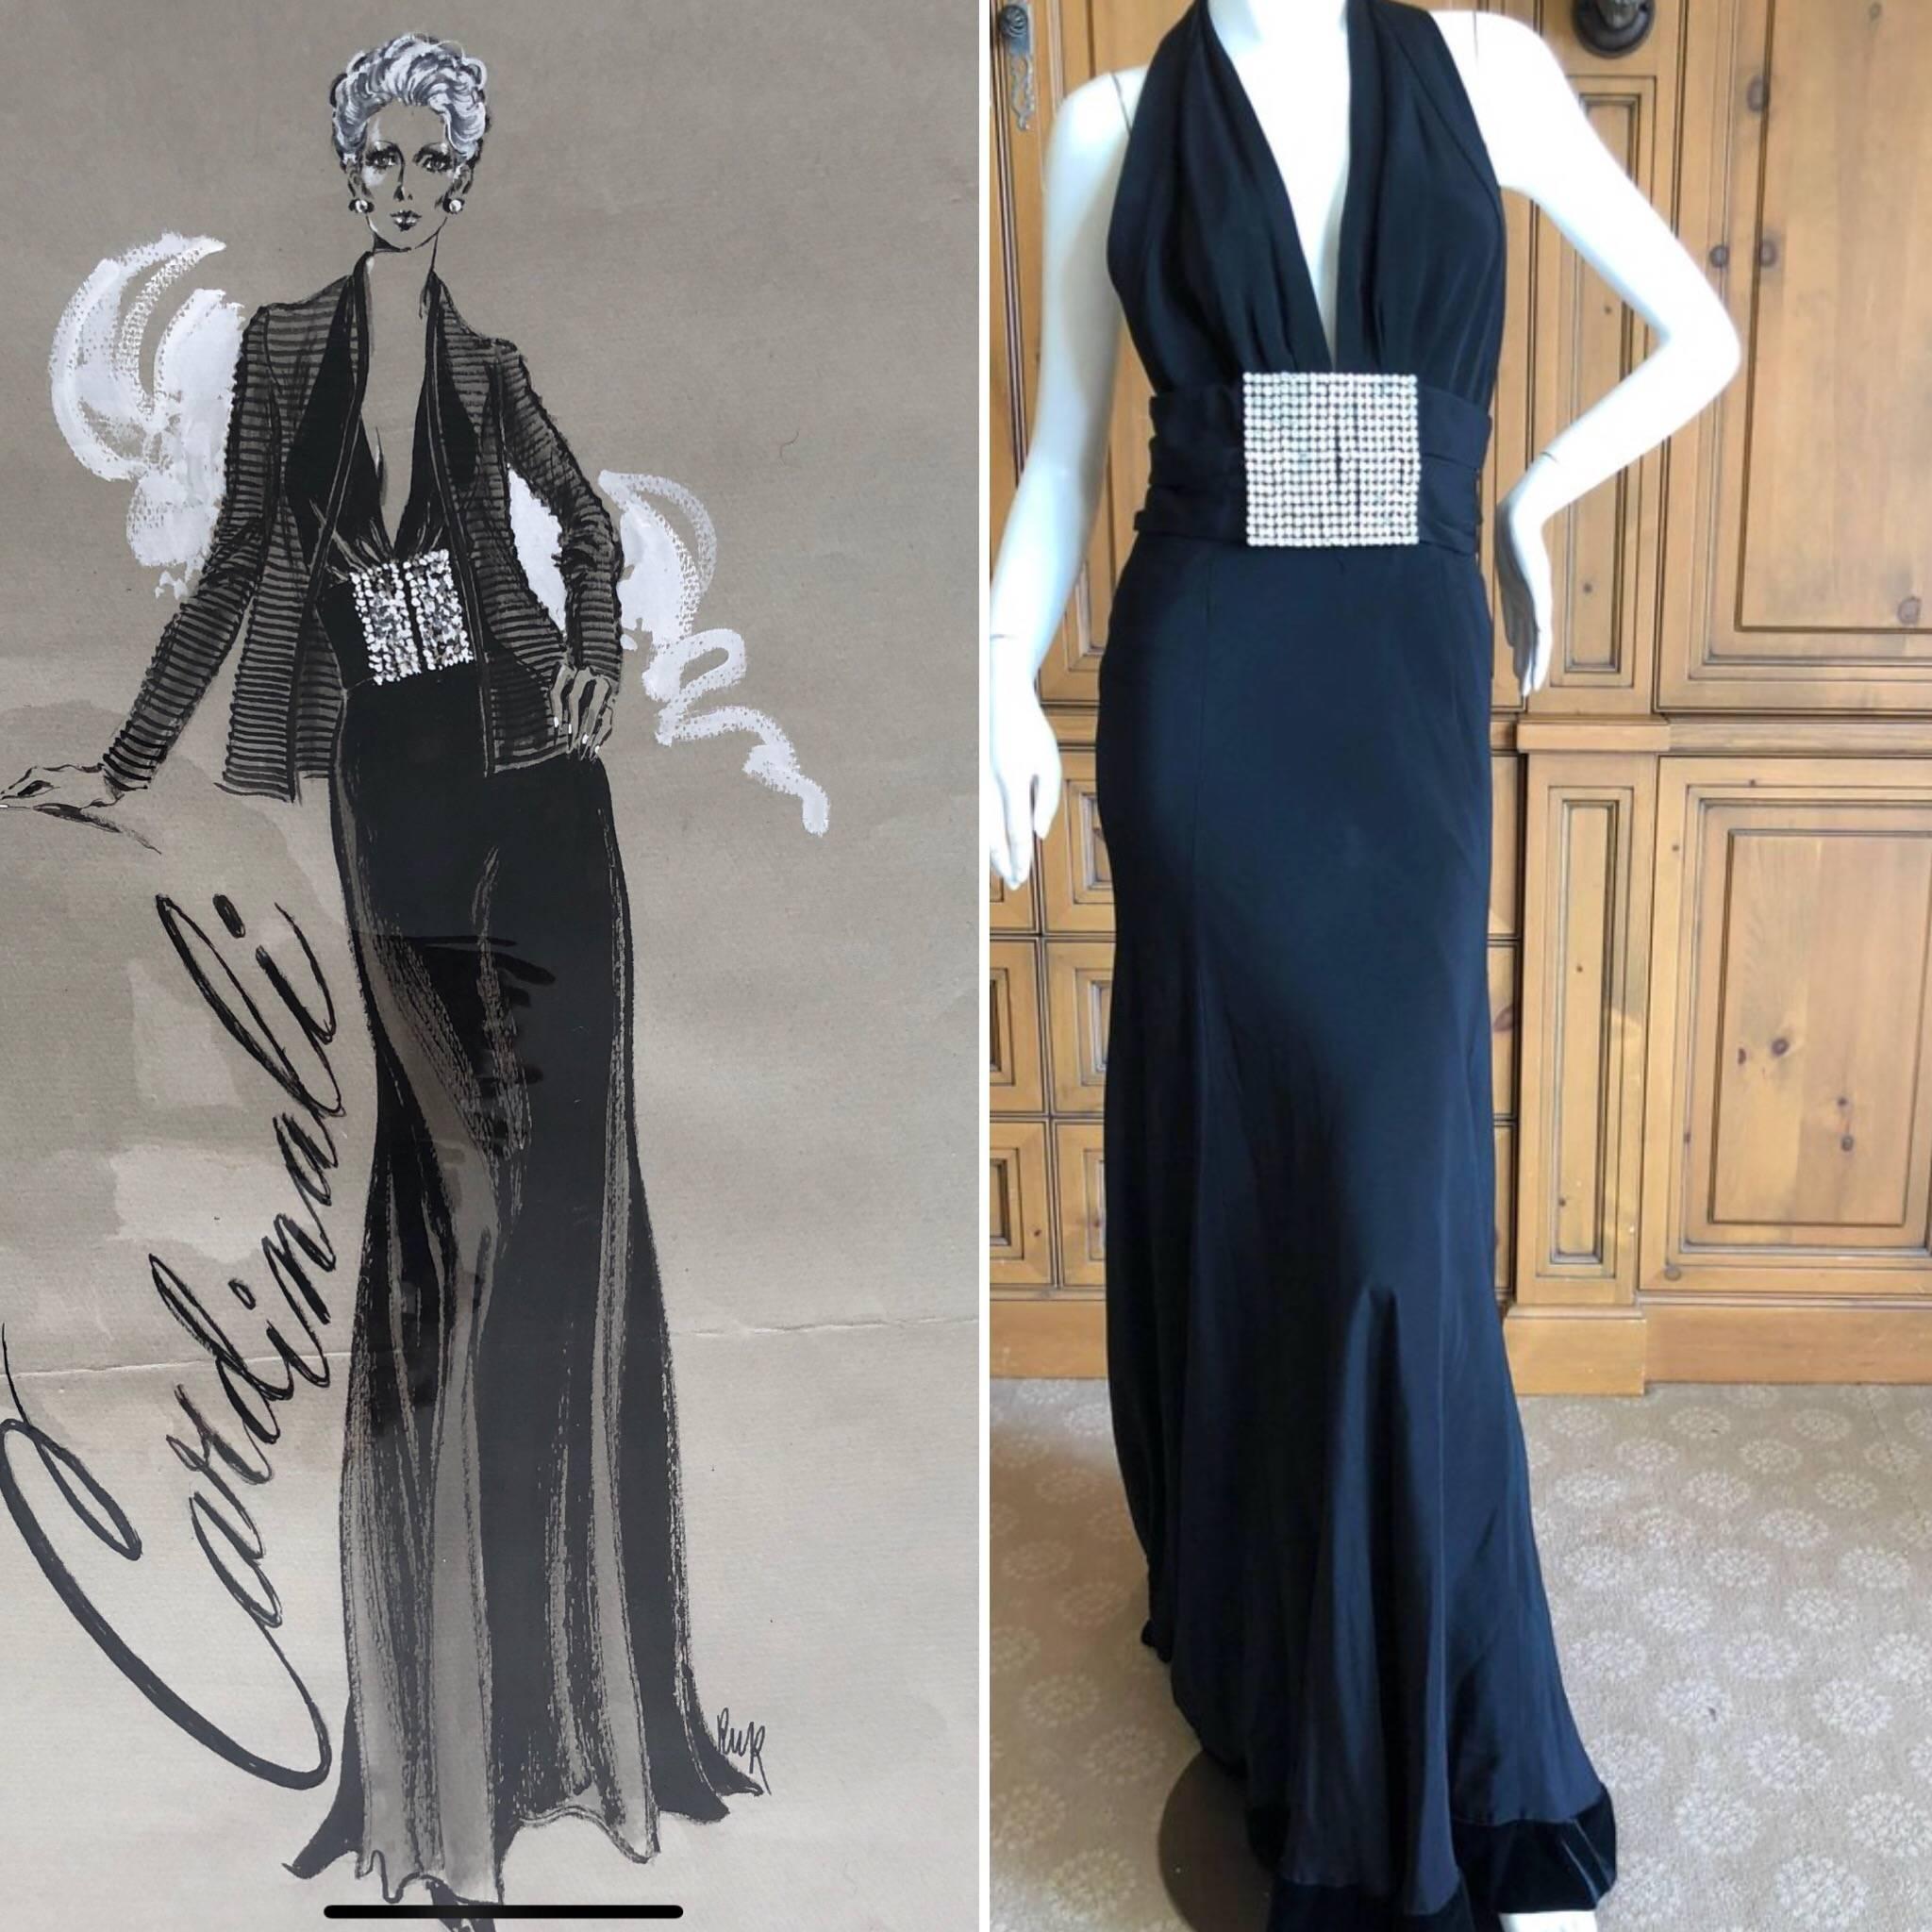 Cardinali Black Low Cut Halter Evening Dress with Huge Rhinestone Crystal Belt
Comes with original fashion illustration art by renowned illustrator Robert W. Richards.
From the Archive of Marilyn Lewis, the creator of Cardinali.
Cardinali was